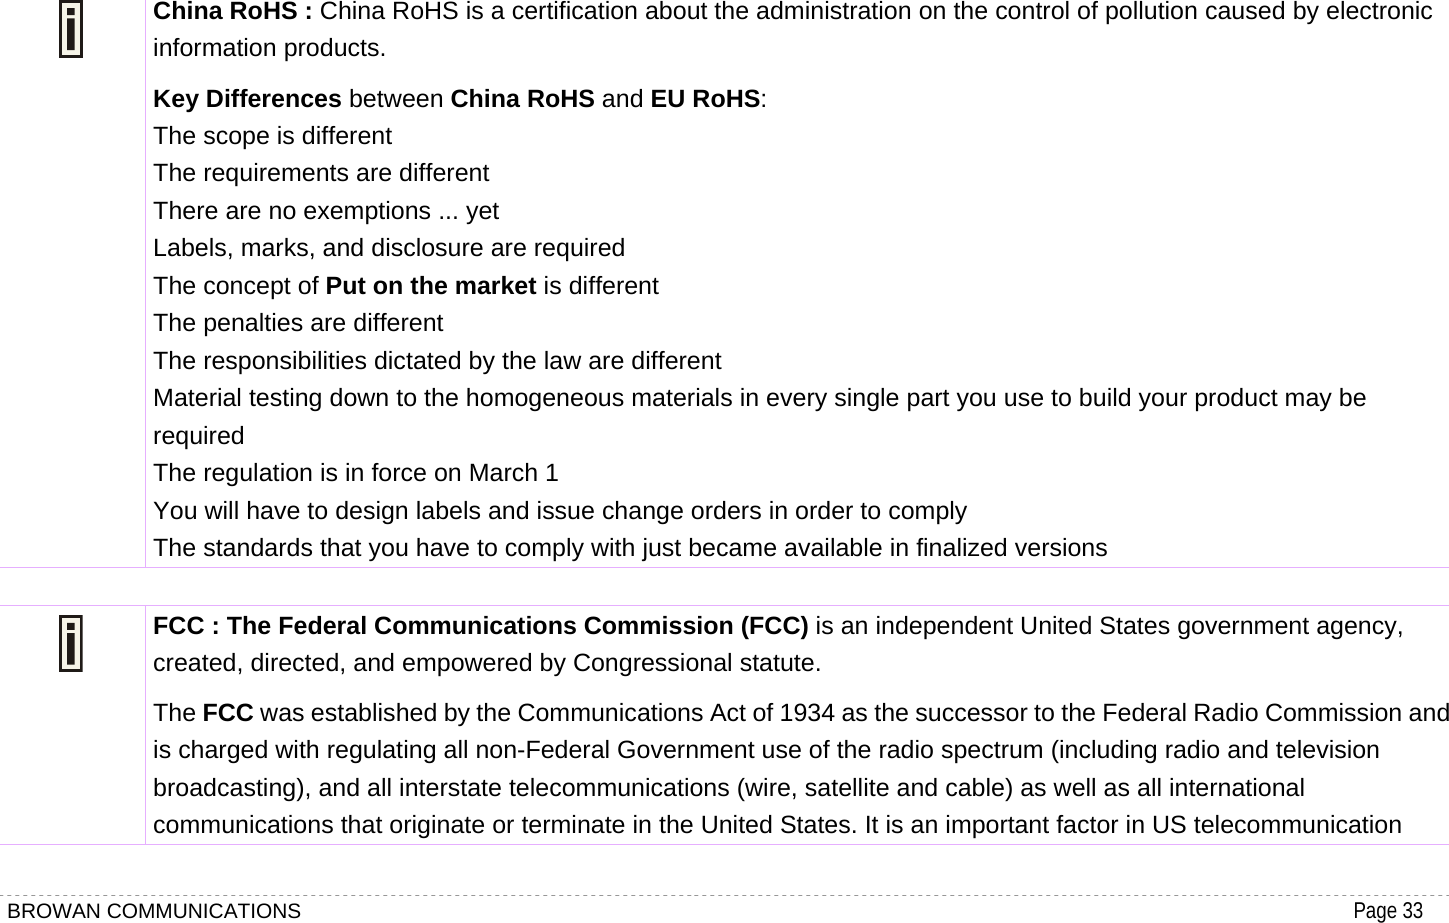 BROWAN COMMUNICATIONS                                                                                           Page 33   China RoHS : China RoHS is a certification about the administration on the control of pollution caused by electronic information products. Key Differences between China RoHS and EU RoHS:  The scope is different   The requirements are different   There are no exemptions ... yet   Labels, marks, and disclosure are required   The concept of Put on the market is different   The penalties are different   The responsibilities dictated by the law are different   Material testing down to the homogeneous materials in every single part you use to build your product may be required  The regulation is in force on March 1   You will have to design labels and issue change orders in order to comply   The standards that you have to comply with just became available in finalized versions   FCC : The Federal Communications Commission (FCC) is an independent United States government agency, created, directed, and empowered by Congressional statute. The FCC was established by the Communications Act of 1934 as the successor to the Federal Radio Commission and is charged with regulating all non-Federal Government use of the radio spectrum (including radio and television broadcasting), and all interstate telecommunications (wire, satellite and cable) as well as all international communications that originate or terminate in the United States. It is an important factor in US telecommunication 